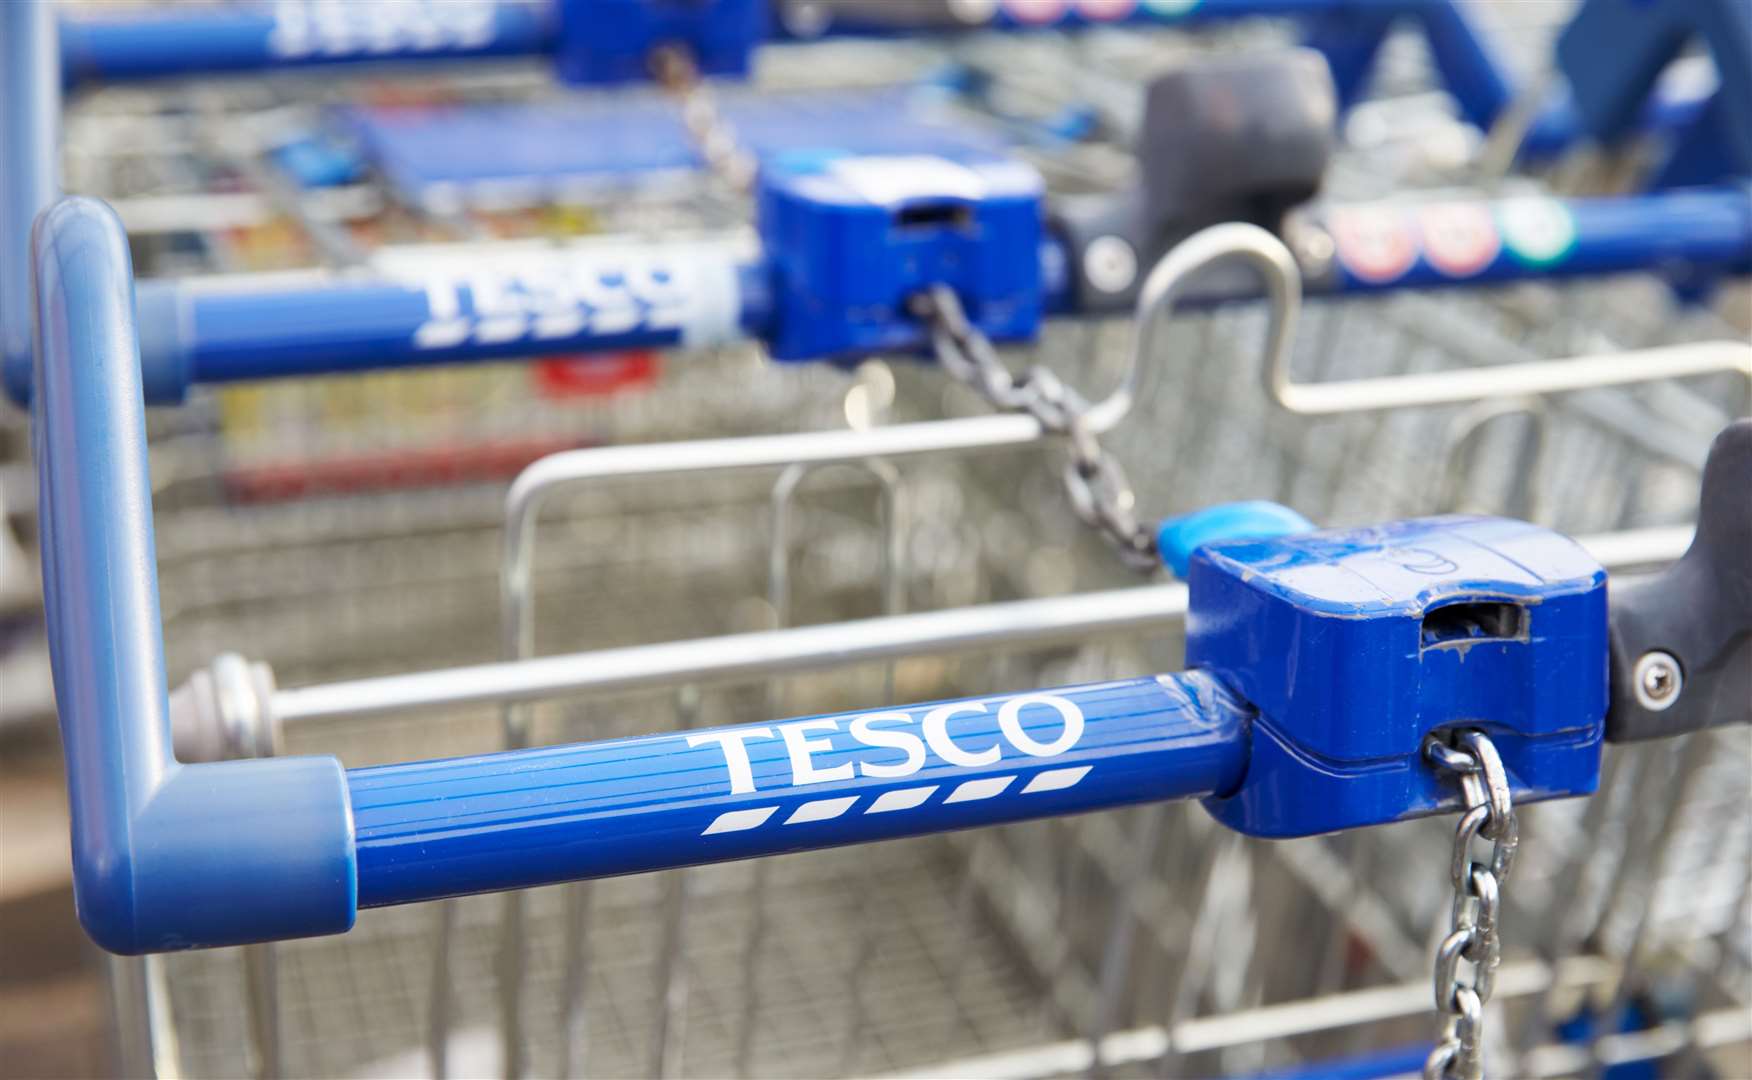 Tesco says it has offered body worn cameras to its staff. Image: iStock.